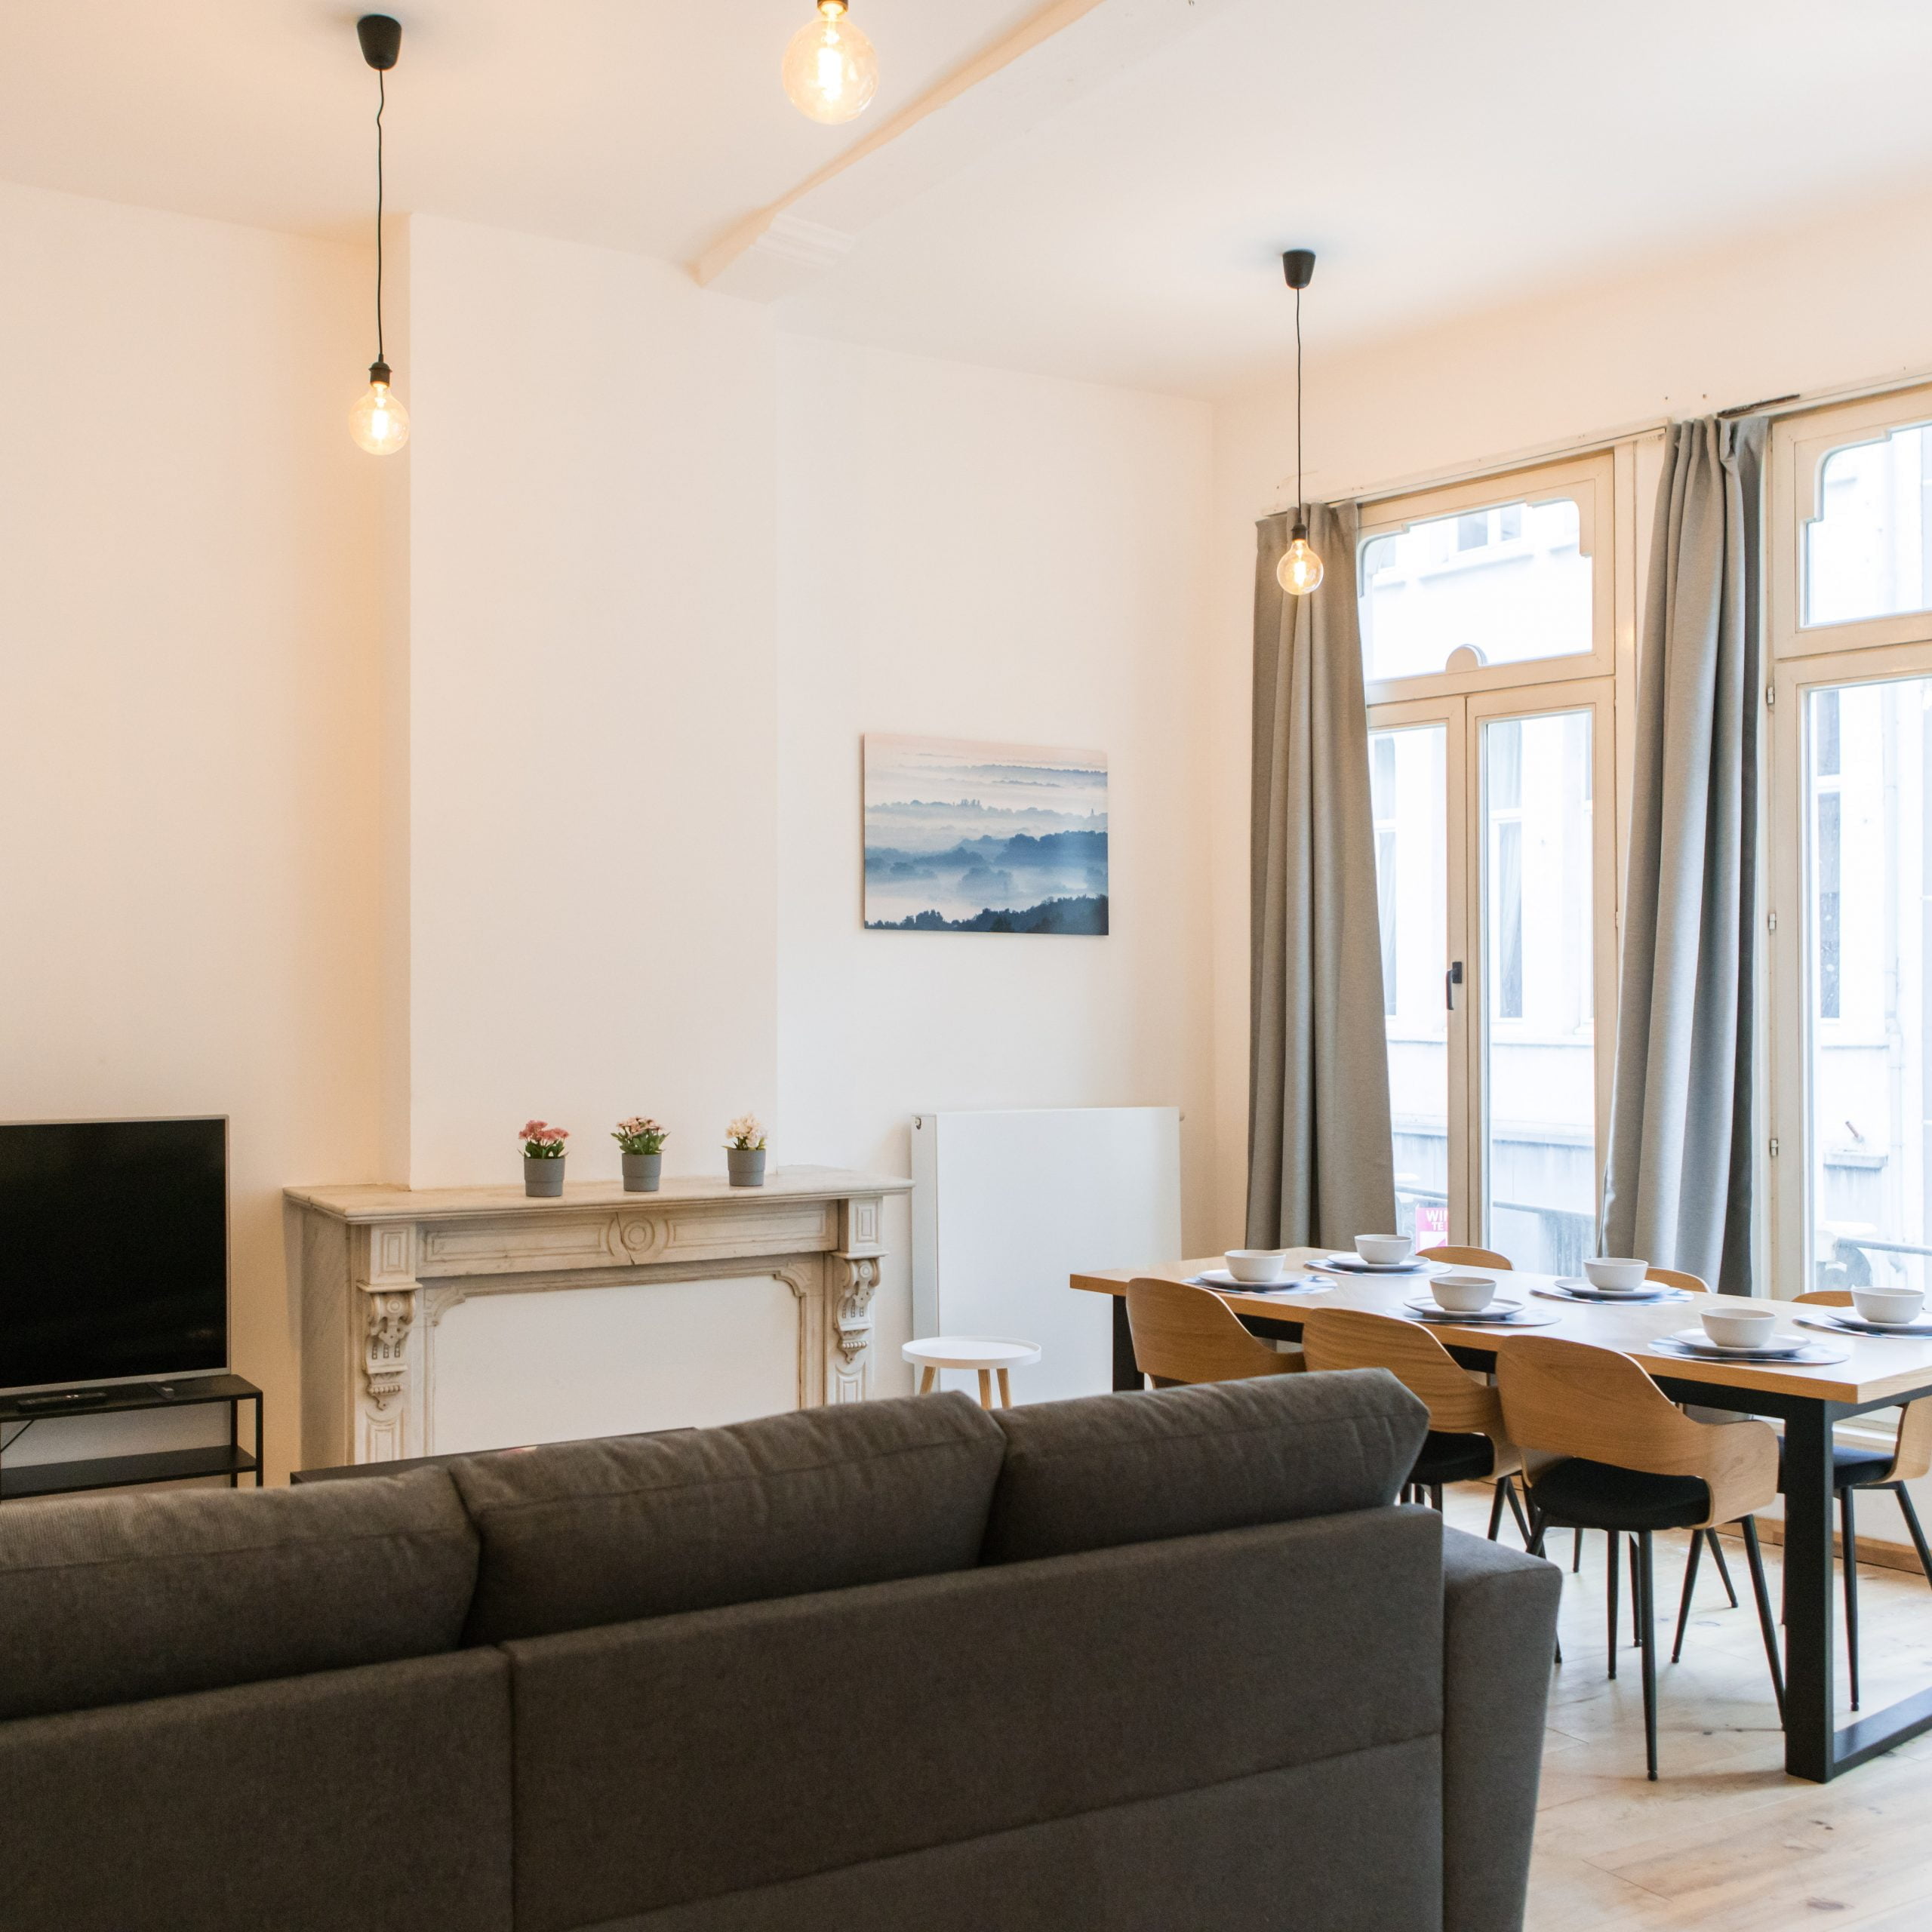 2 bedroom apartment for expats in Antwerp